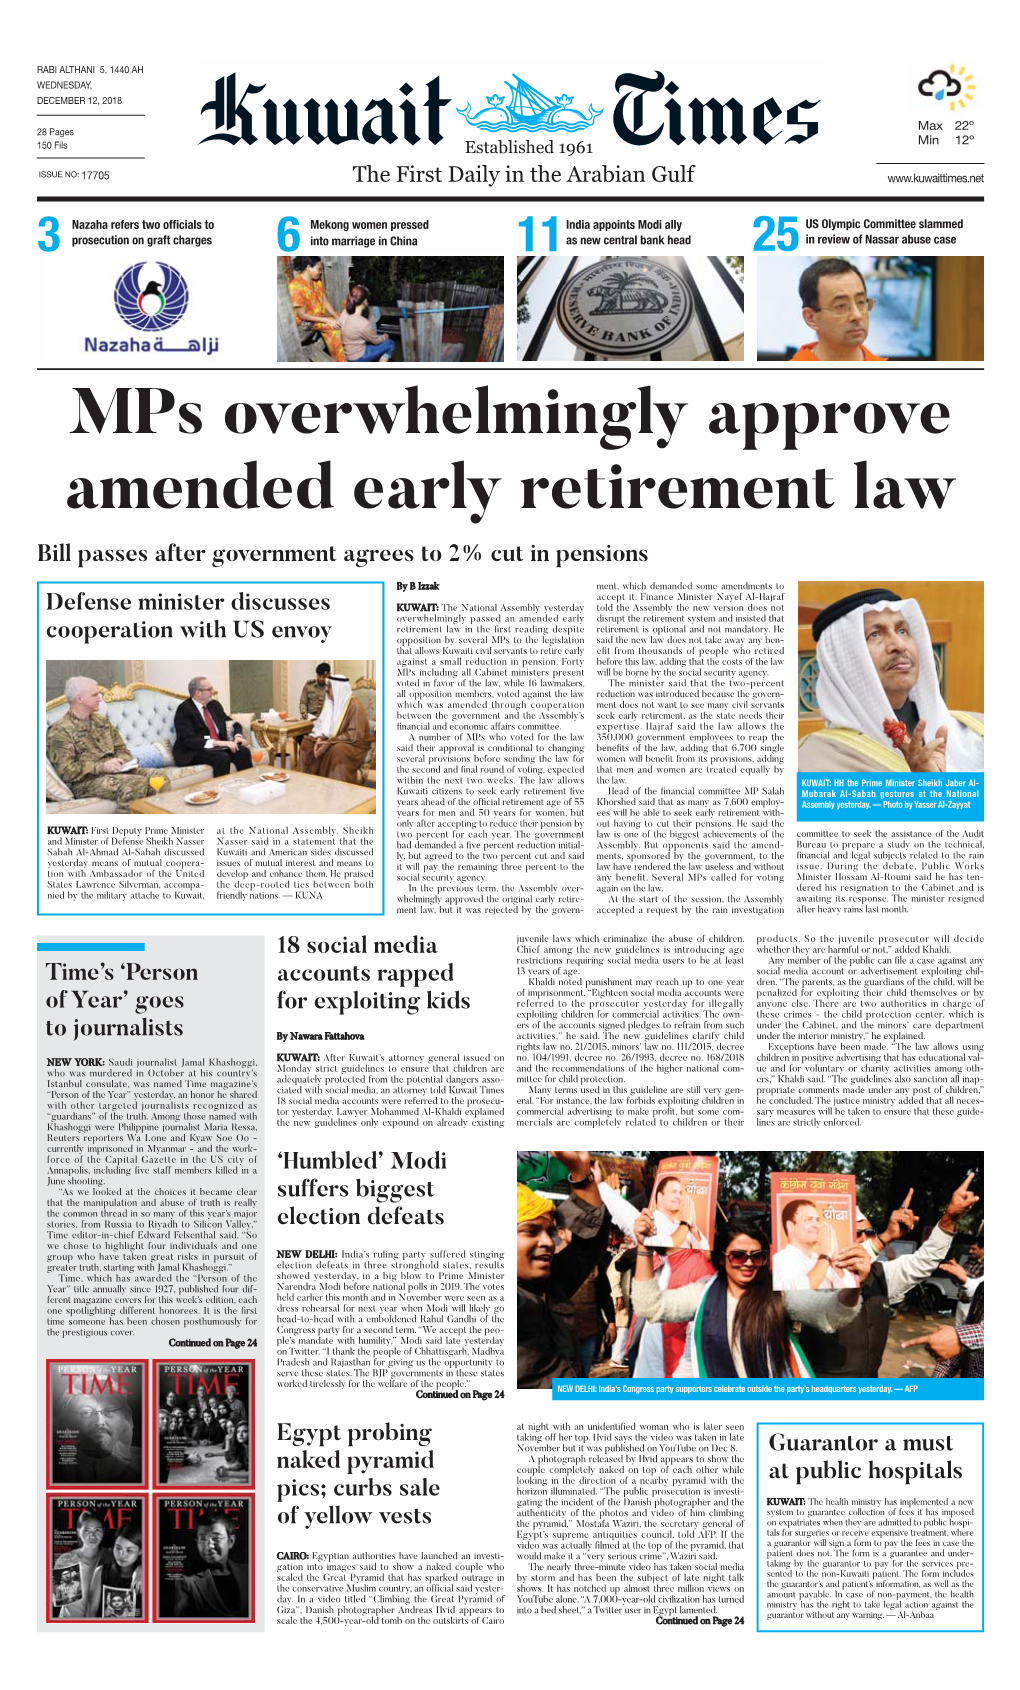 Mps Overwhelmingly Approve Amended Early Retirement Law Bill Passes After Government Agrees to 2% Cut in Pensions